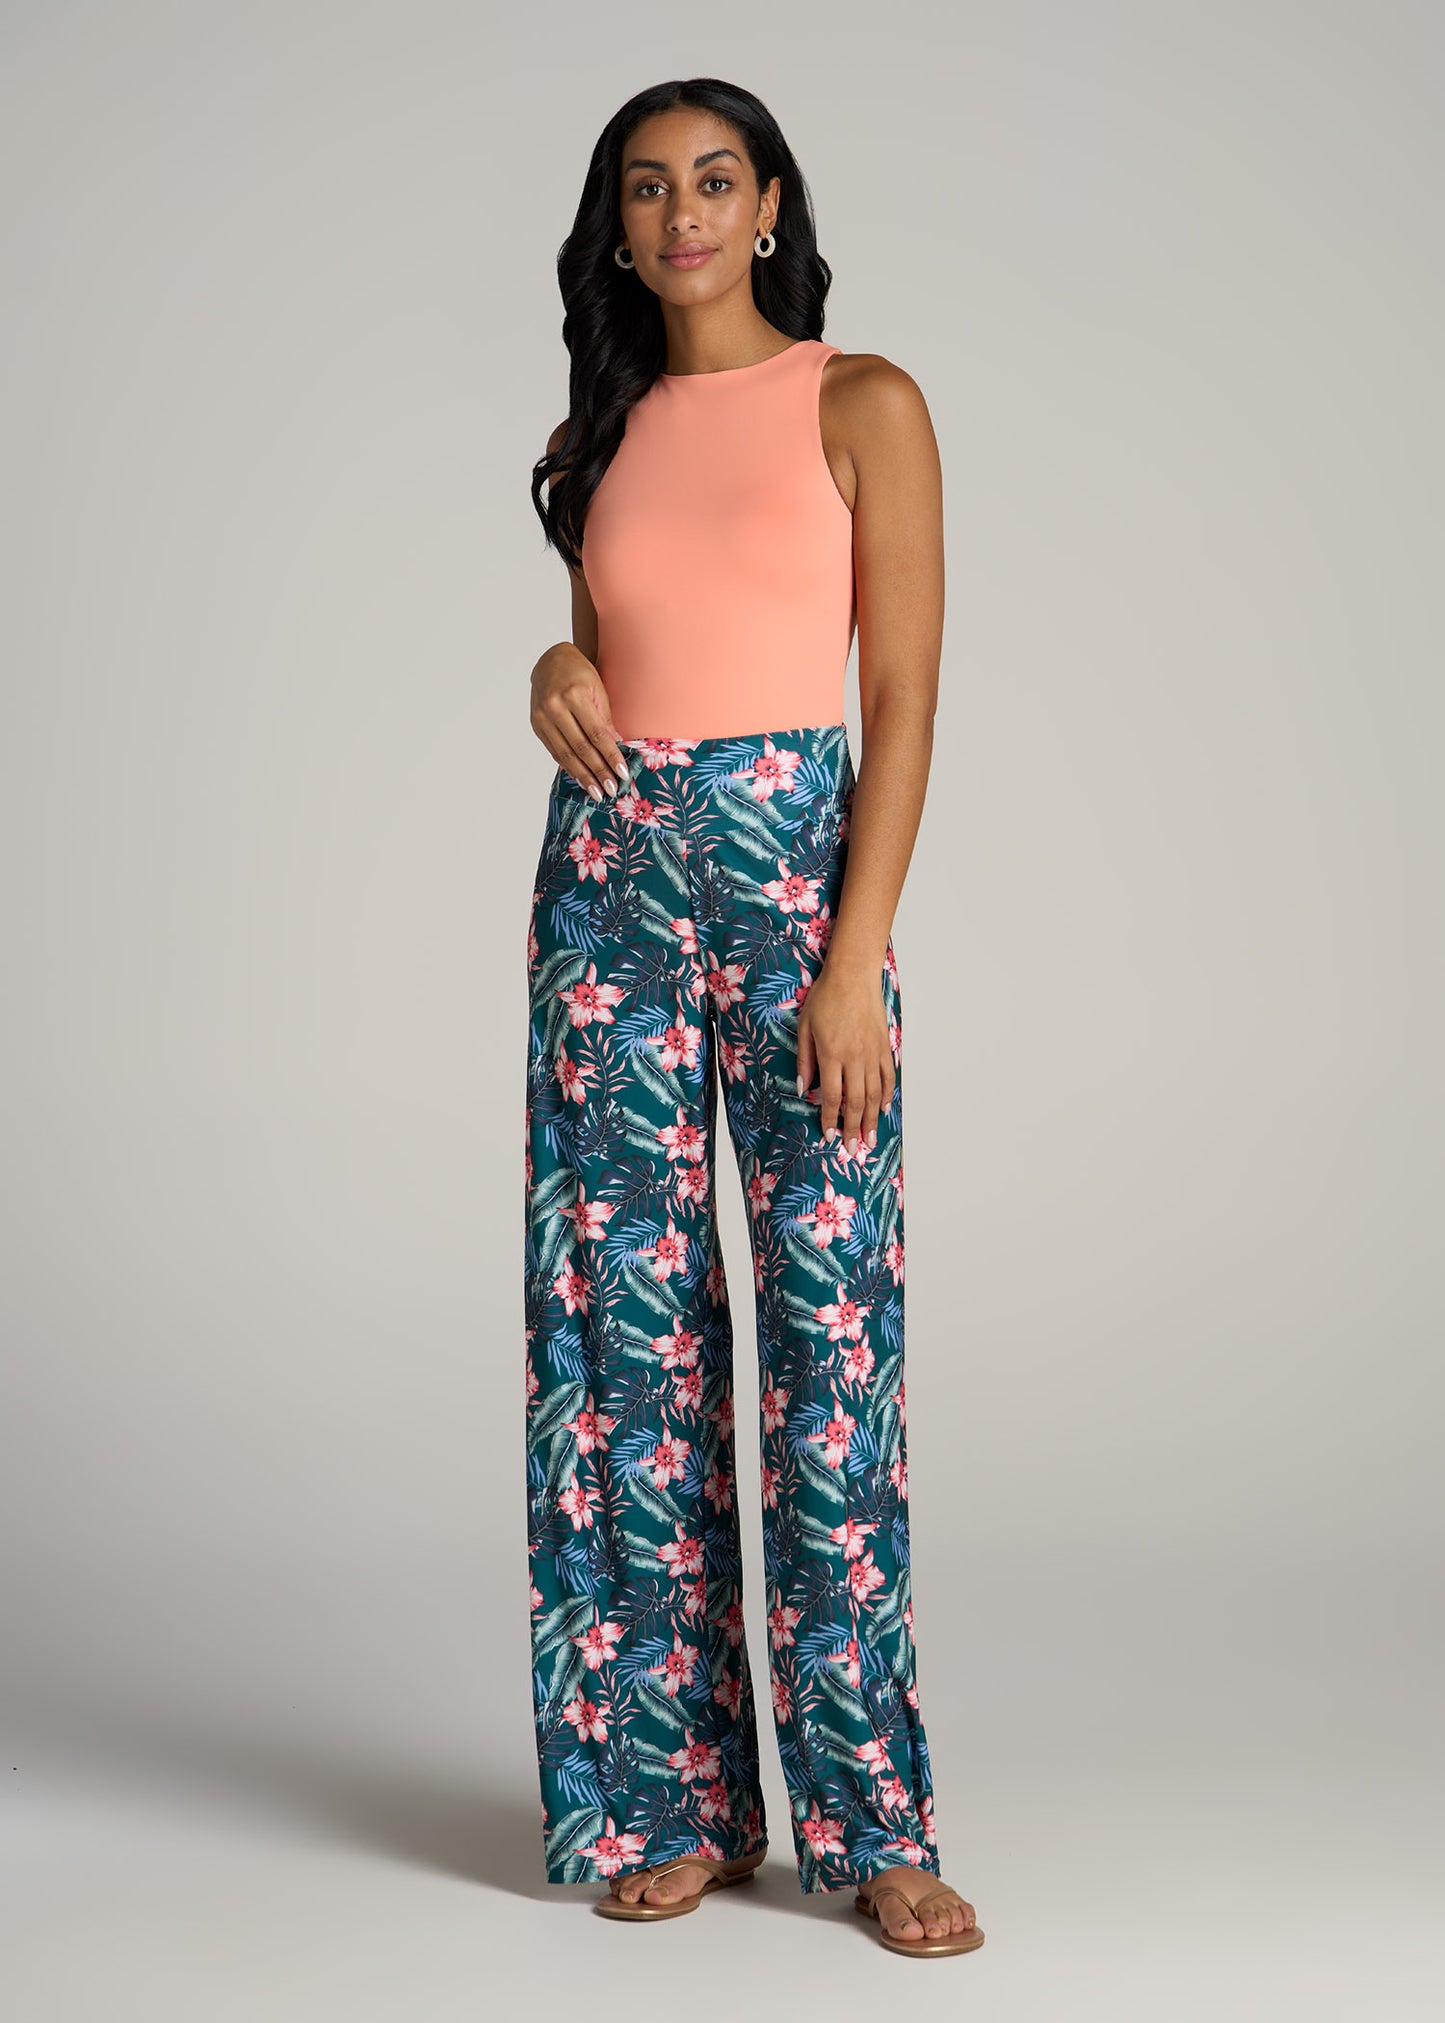 Pull On Breezy Wide Leg Pants for Tall Women in Green Tropical Floral Print